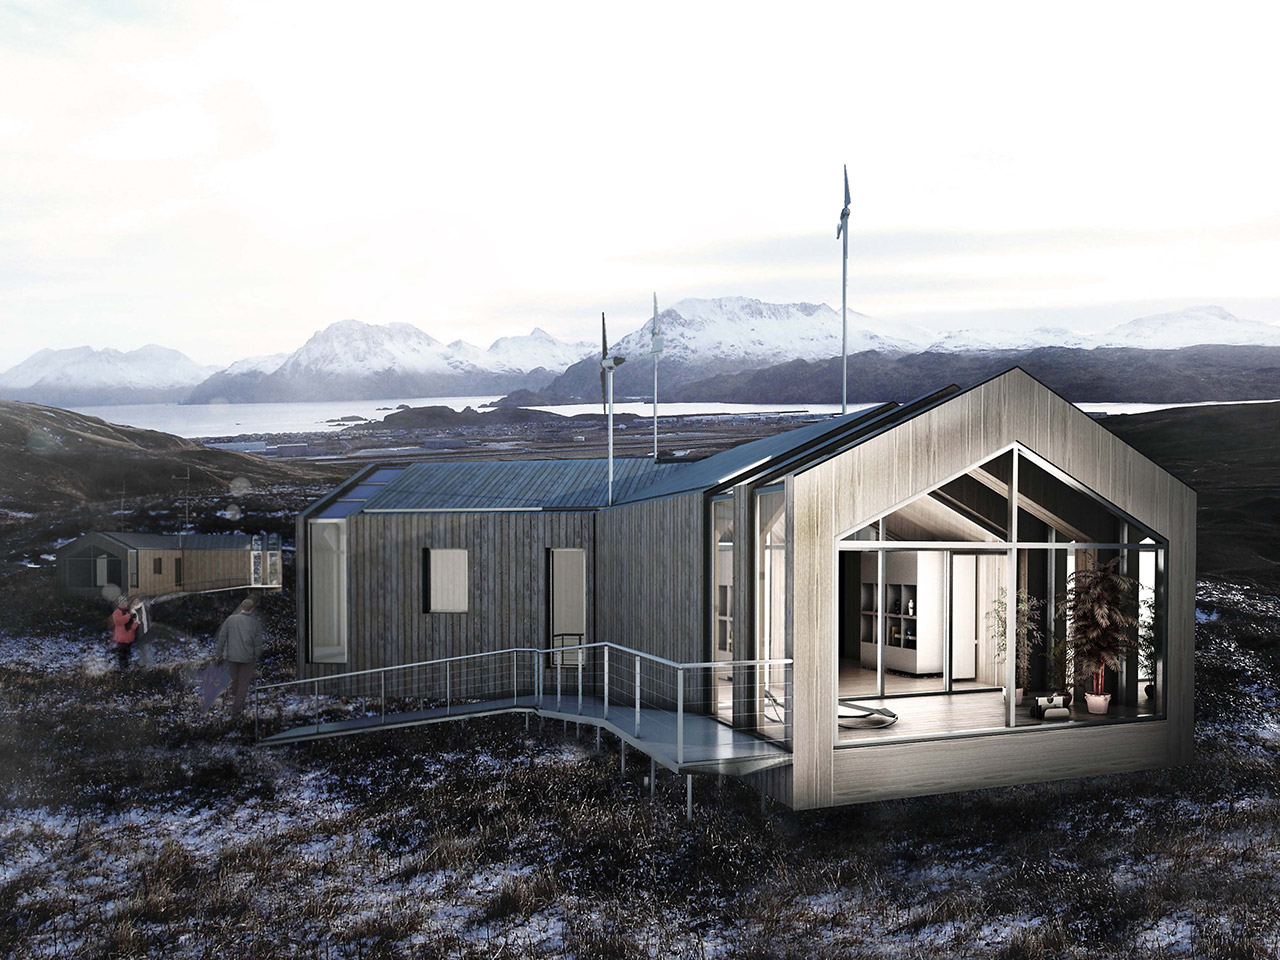 24Studio's Honorable Mention for the Living Aleutian Home Design Competition 2012